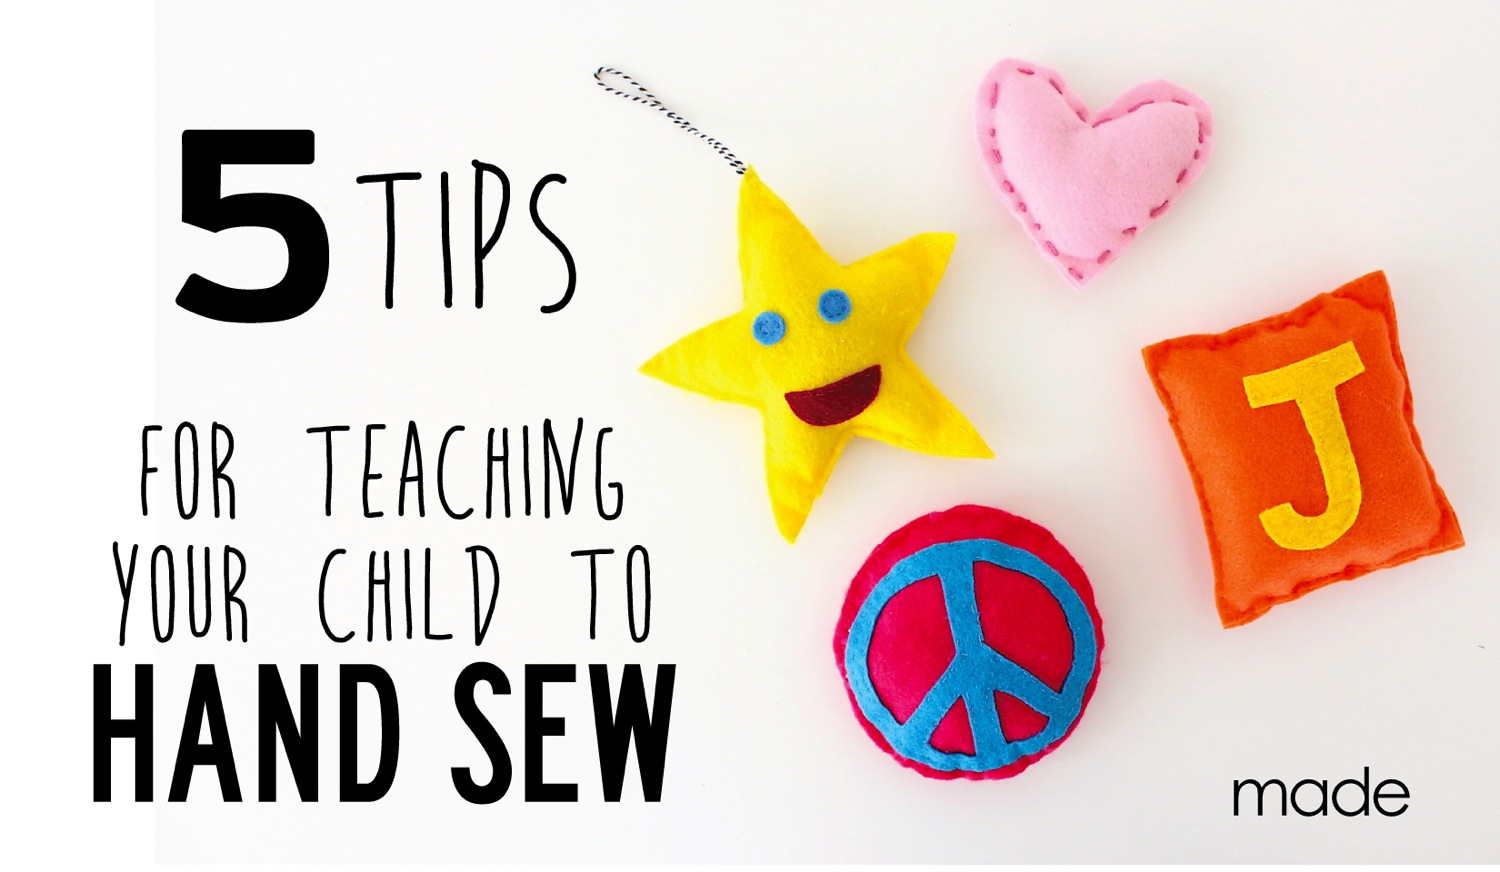 Teach Hand Sewing - MADE EVERYDAY